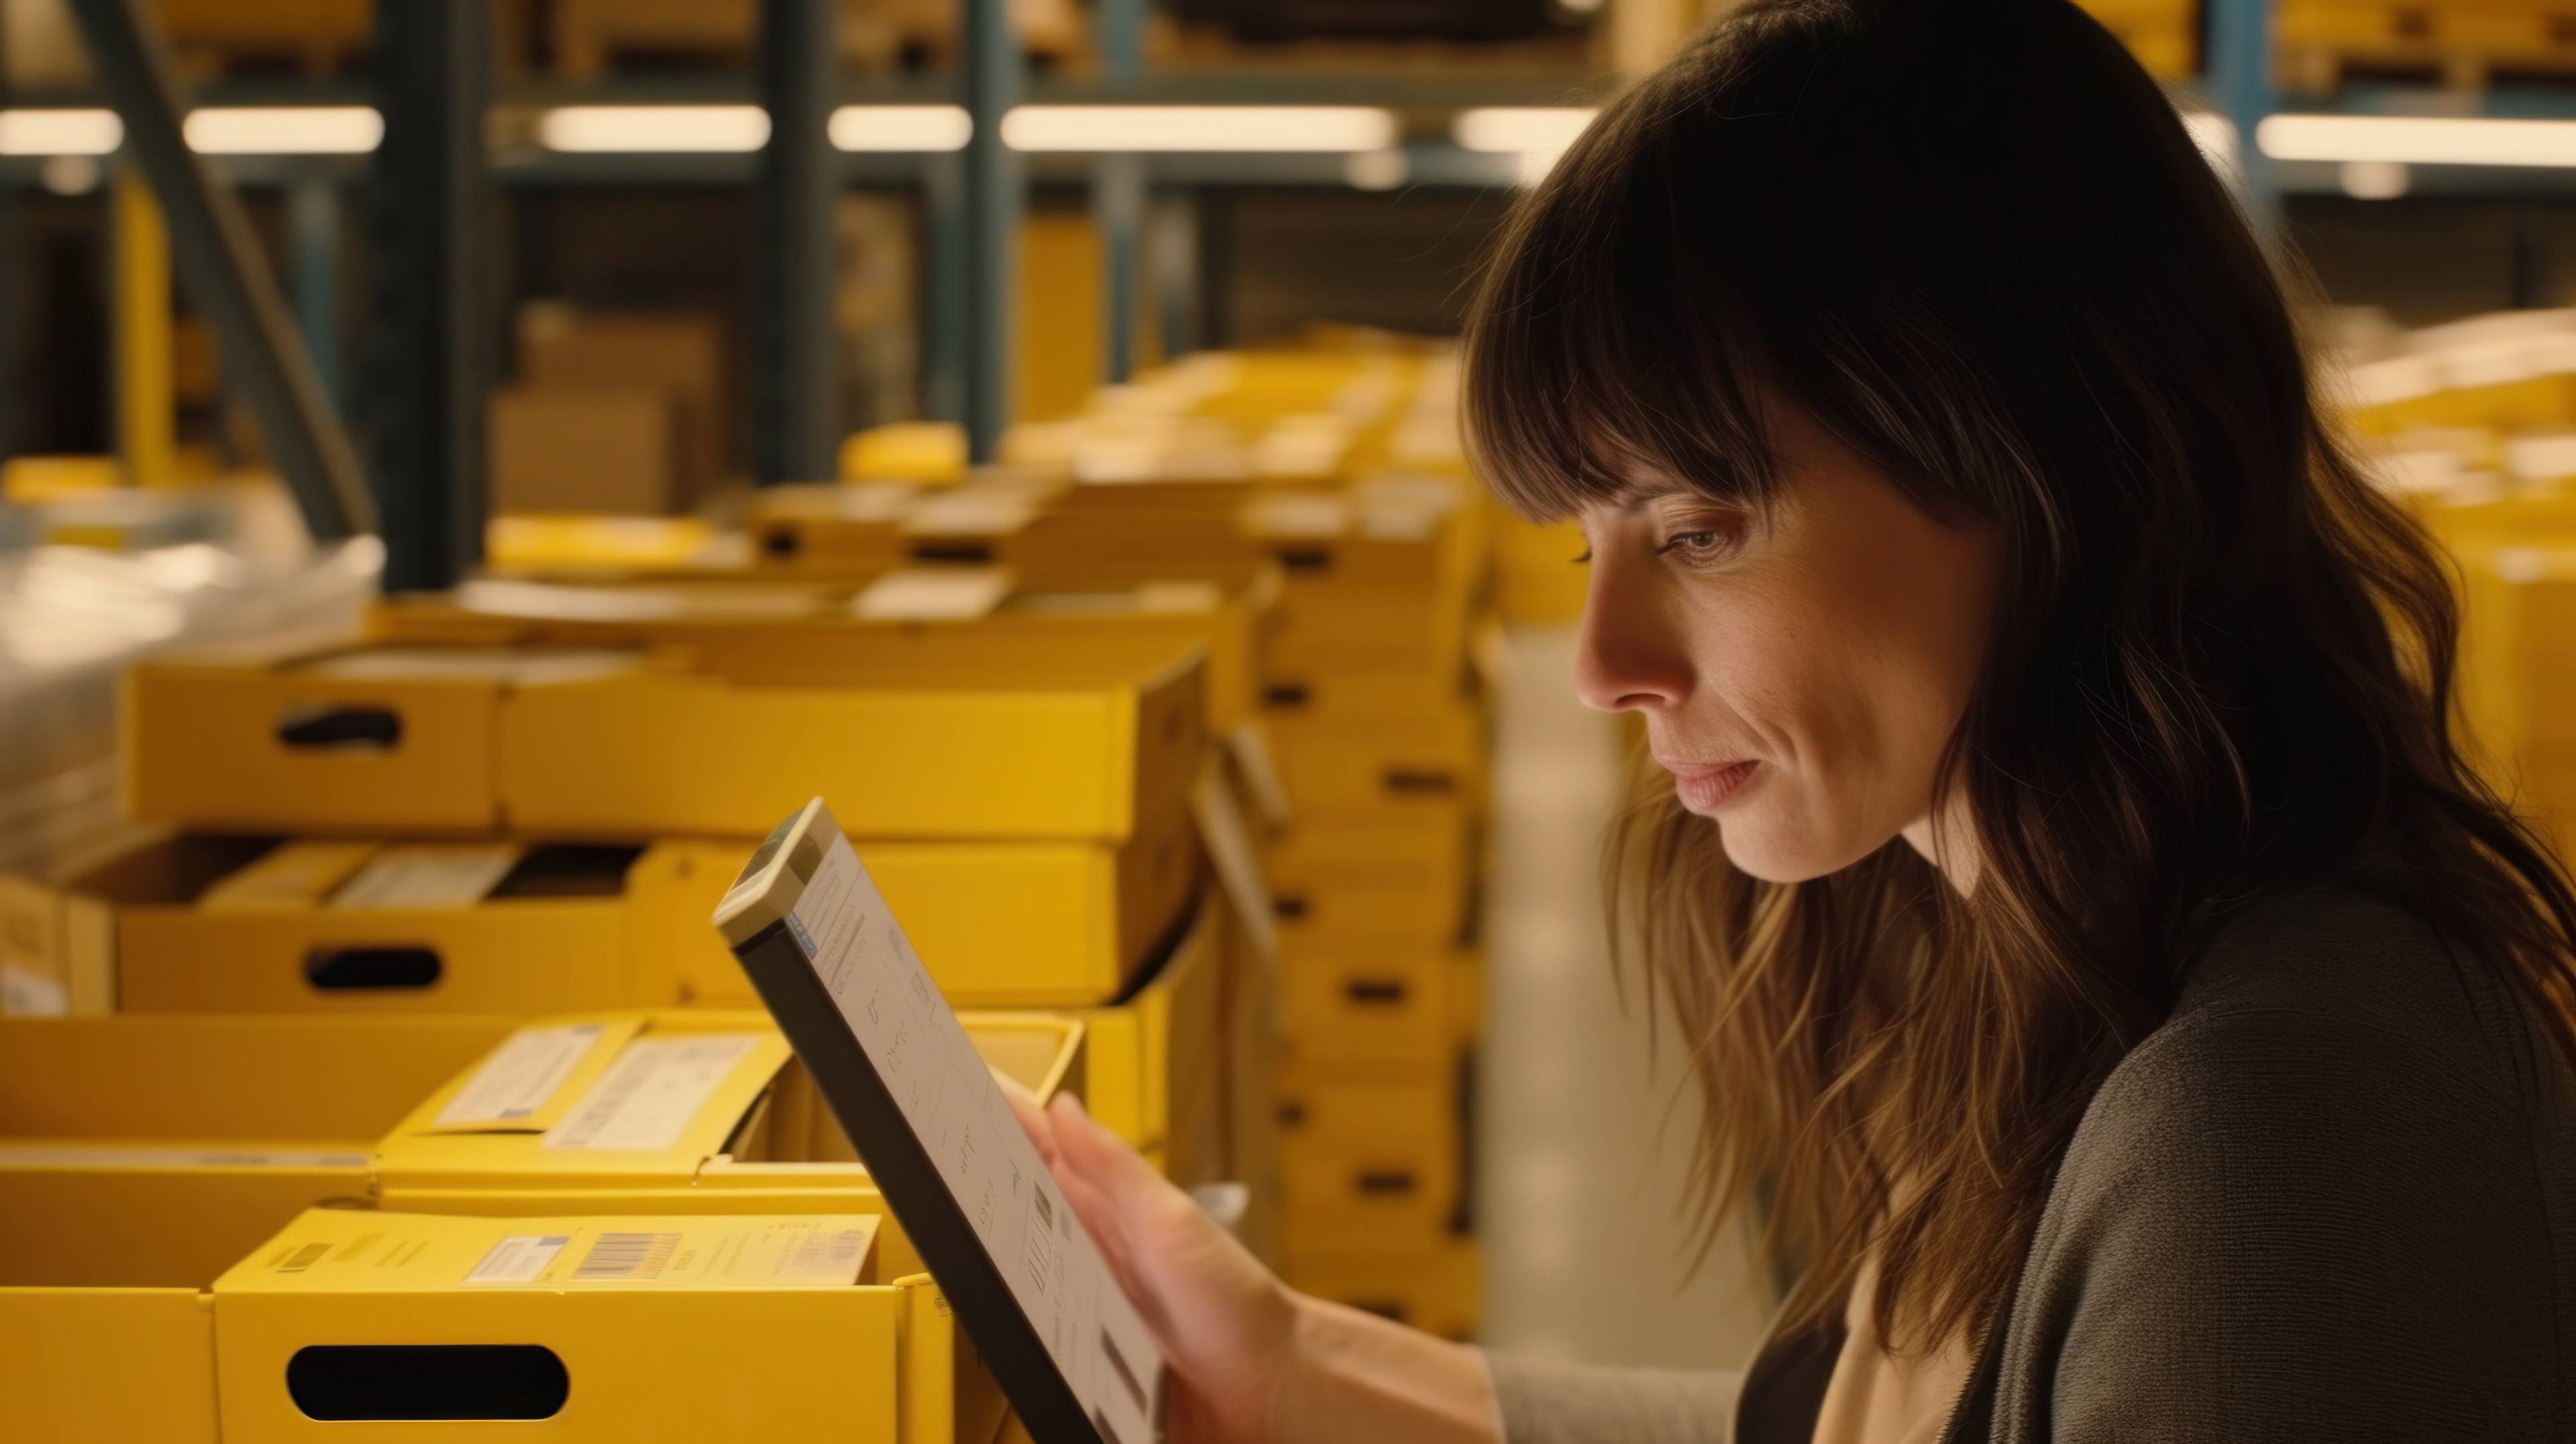 woman carefully inspecting laptop in warehouse